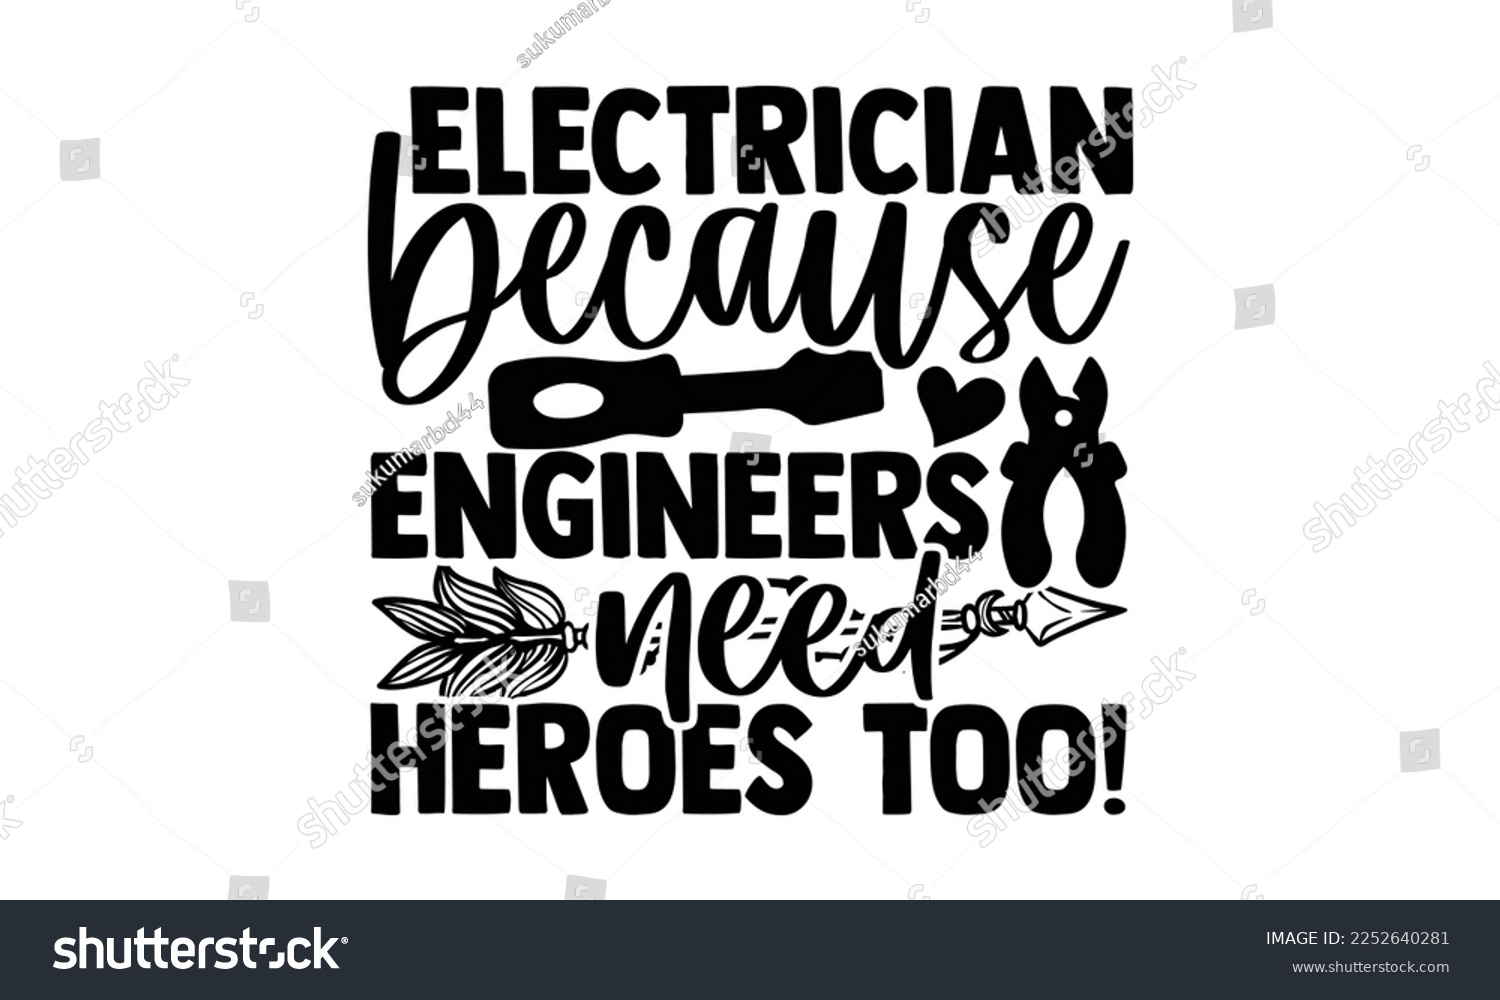 SVG of Electrician Because Engineers Need Heroes Too! - Electrician Svg Design, Calligraphy graphic design, Hand written vector svg design, t-shirts, bags, posters, cards, for Cutting Machine, Silhouette Cam svg